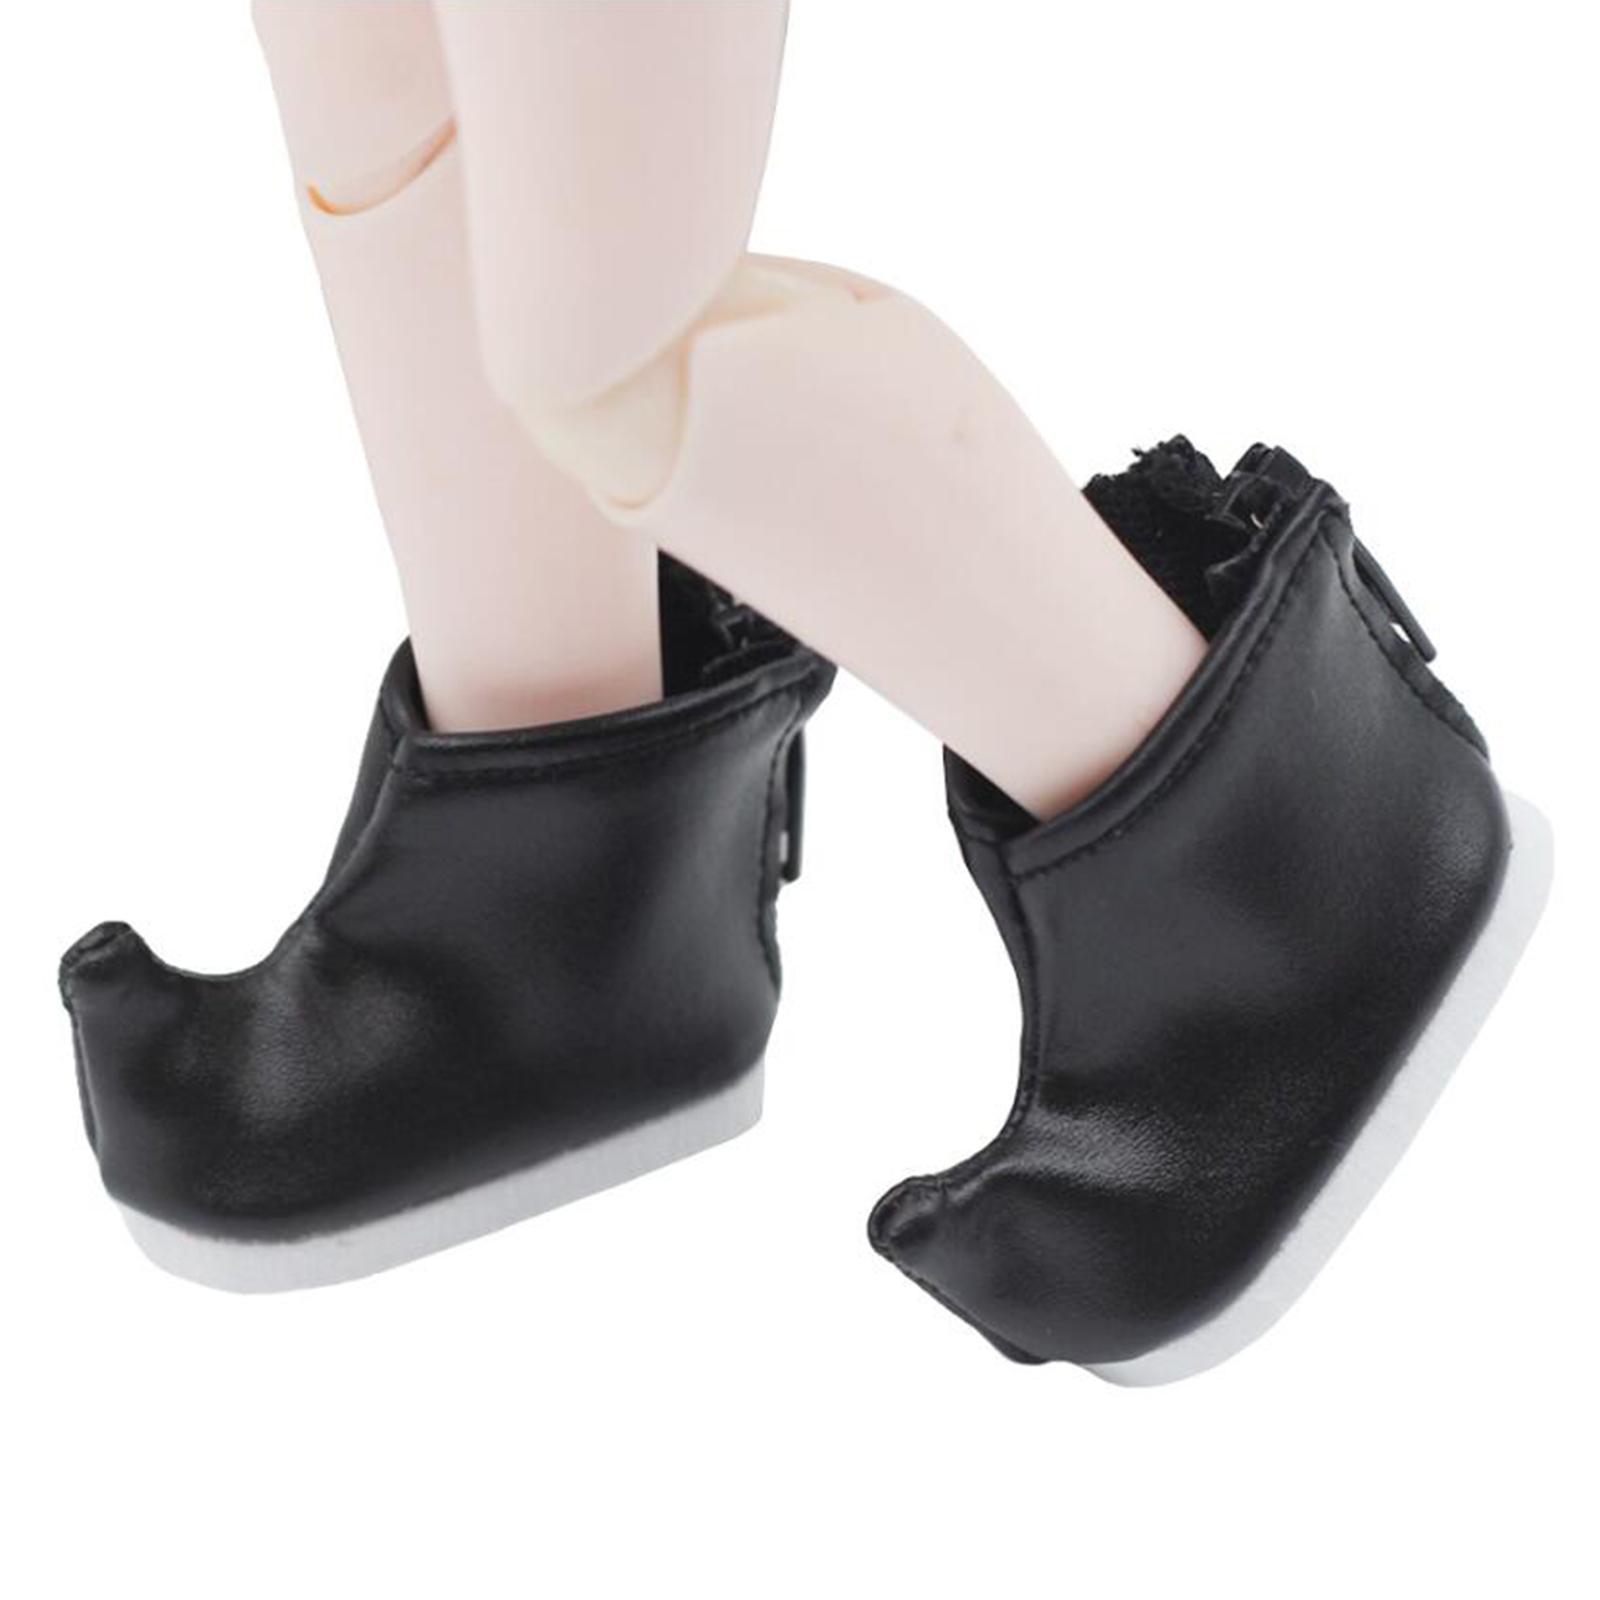 Fashion Doll Shoes Miniature Shoes Costume Accessories for 1:6 Doll Black